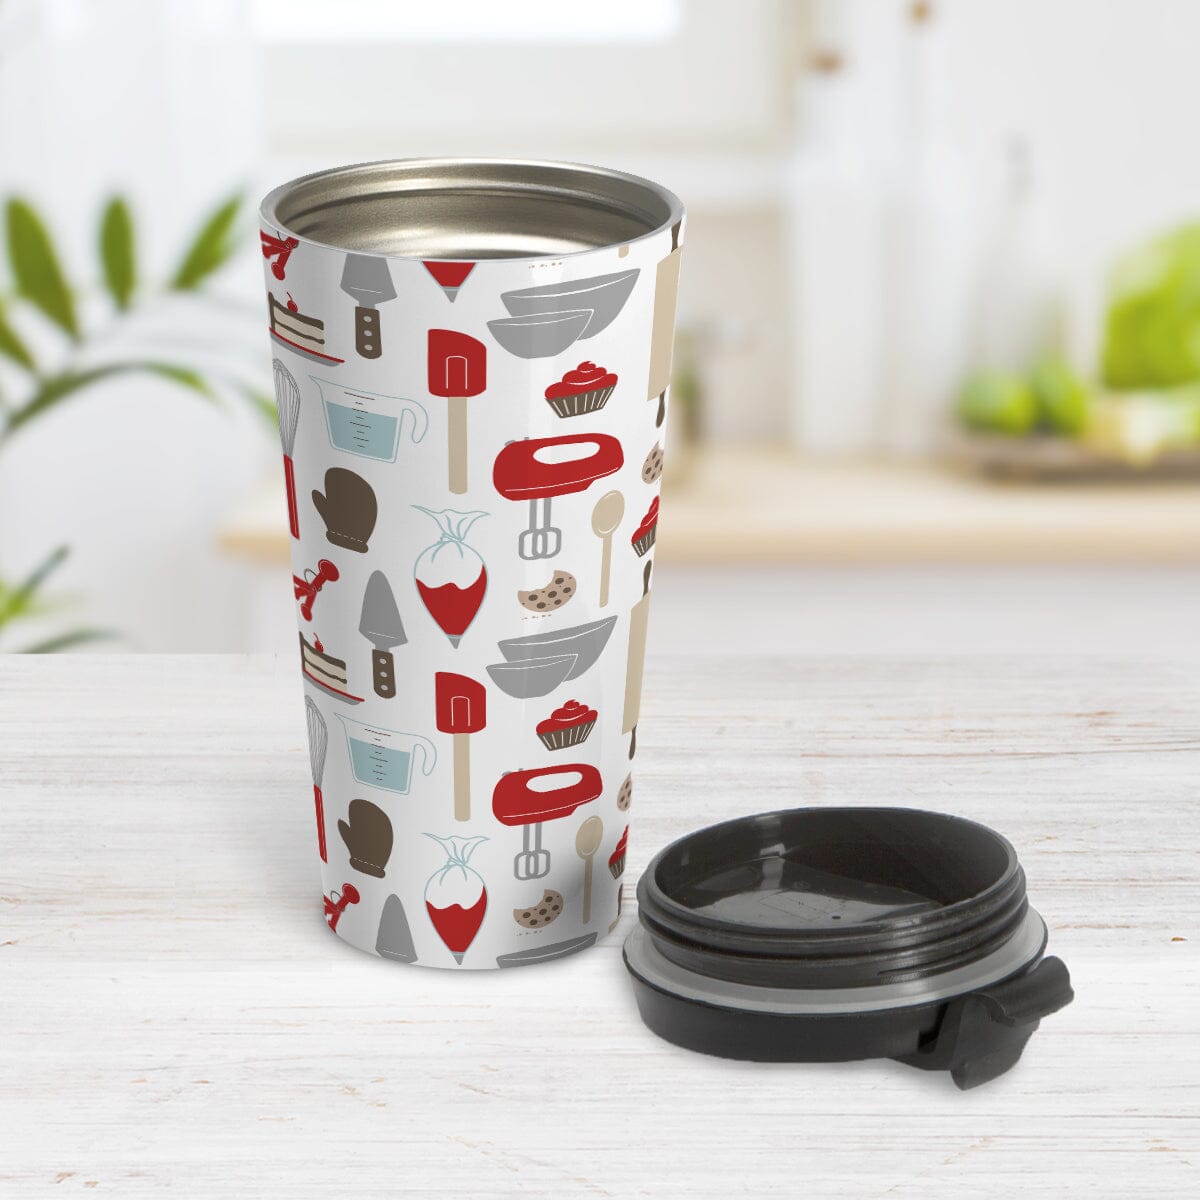 Red Baking Pattern Travel Mug (15oz) at Amy's Coffee Mugs. A stainless steel travel mug designed with a pattern of baking tools like spatulas, whisks, mixers, bowls, and spoons, with cookies, cupcakes, and cake all in a red, gray, brown, and beige color scheme that wraps around the travel mug.  Photo shows the travel mug open with the lid on the tabletop next to it. 